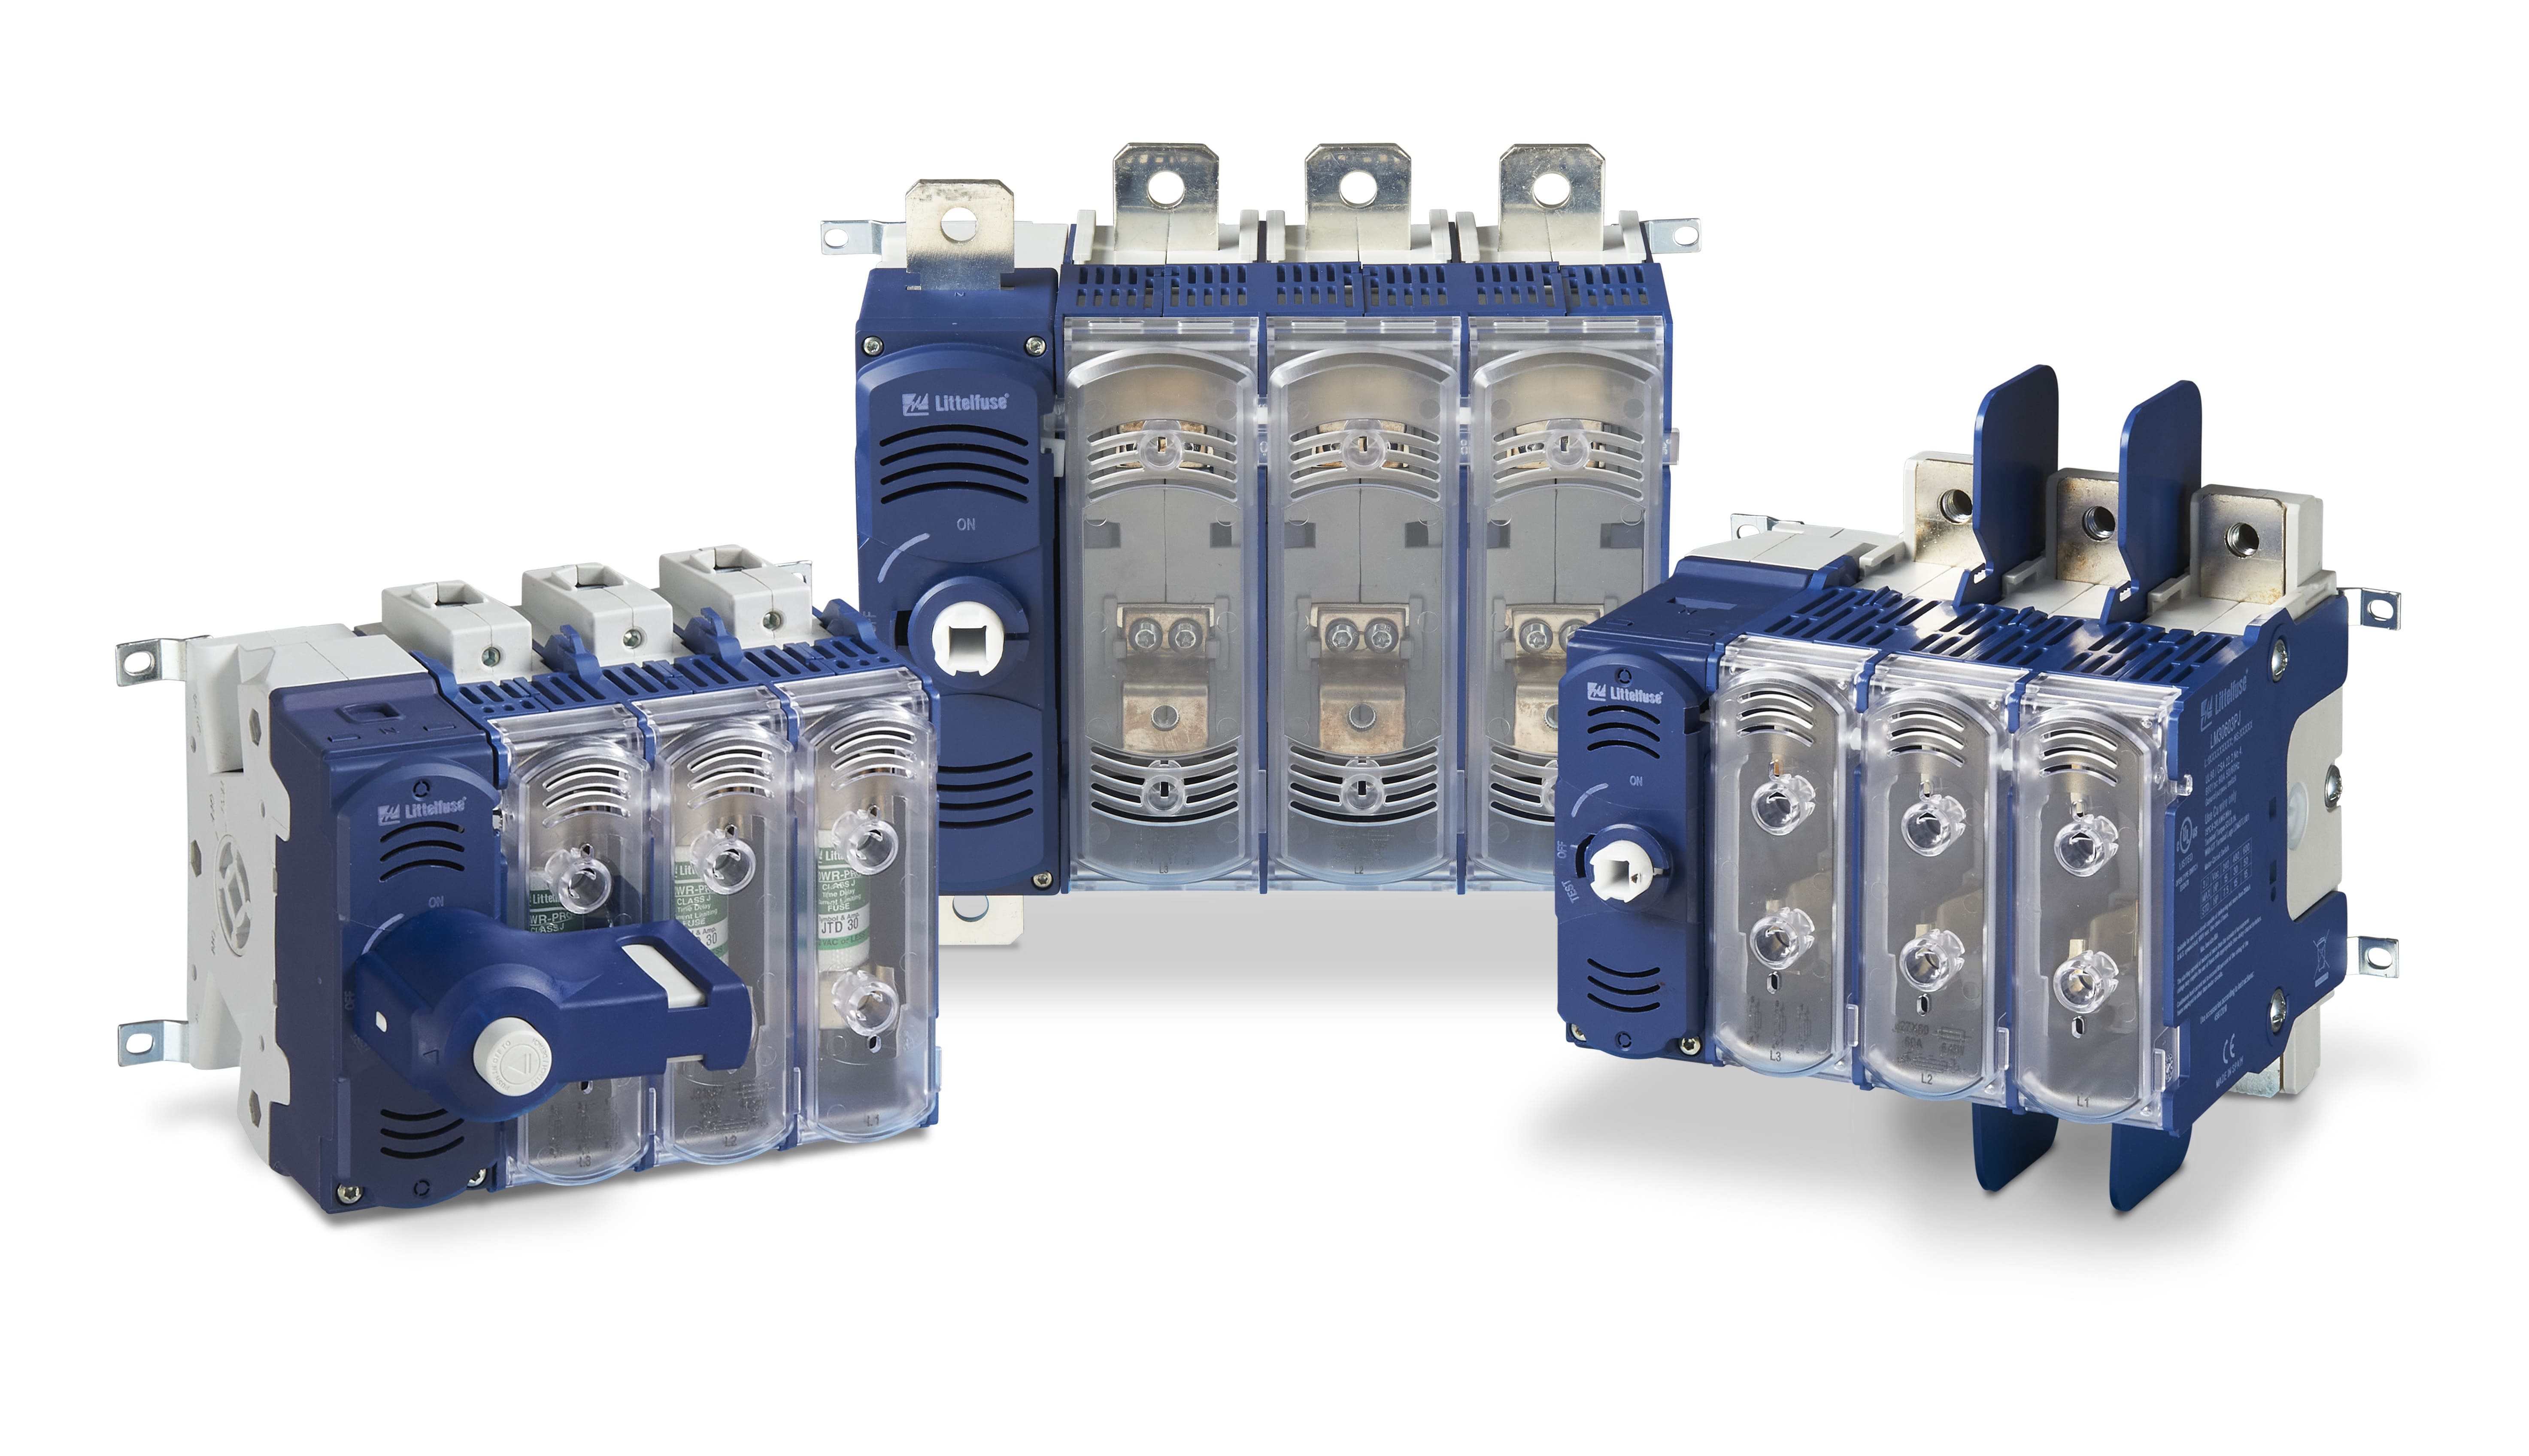 Littelfuse Launches Its Class J Fuse Disconnect Switch - Littelfuse